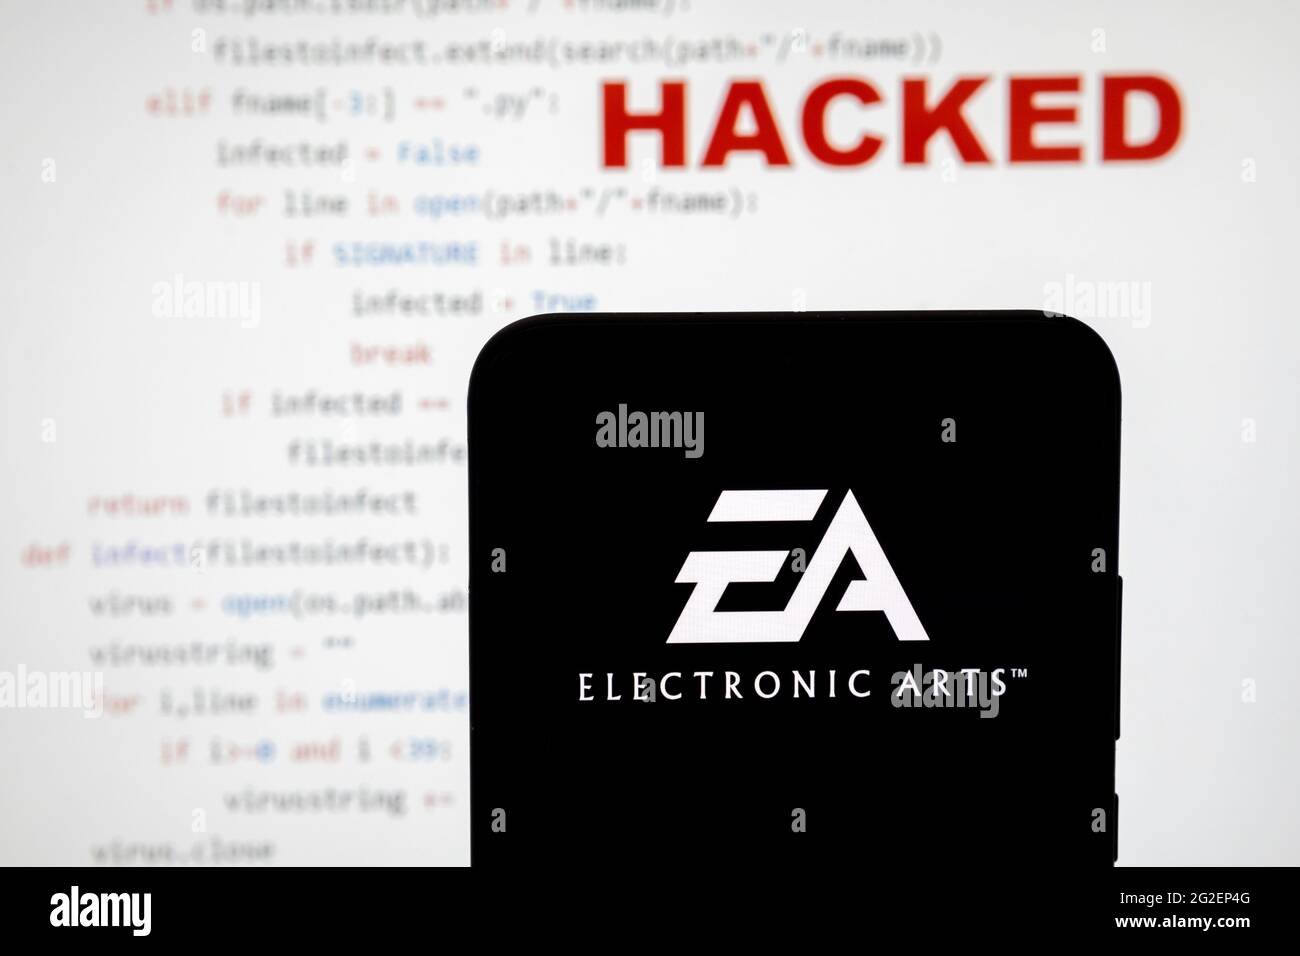 EA Electronic arts logo seen on a silhouette of the smartphone and simple source code on with word HACKED on blurred background. Concept. REAL PHOTO, Stock Photo